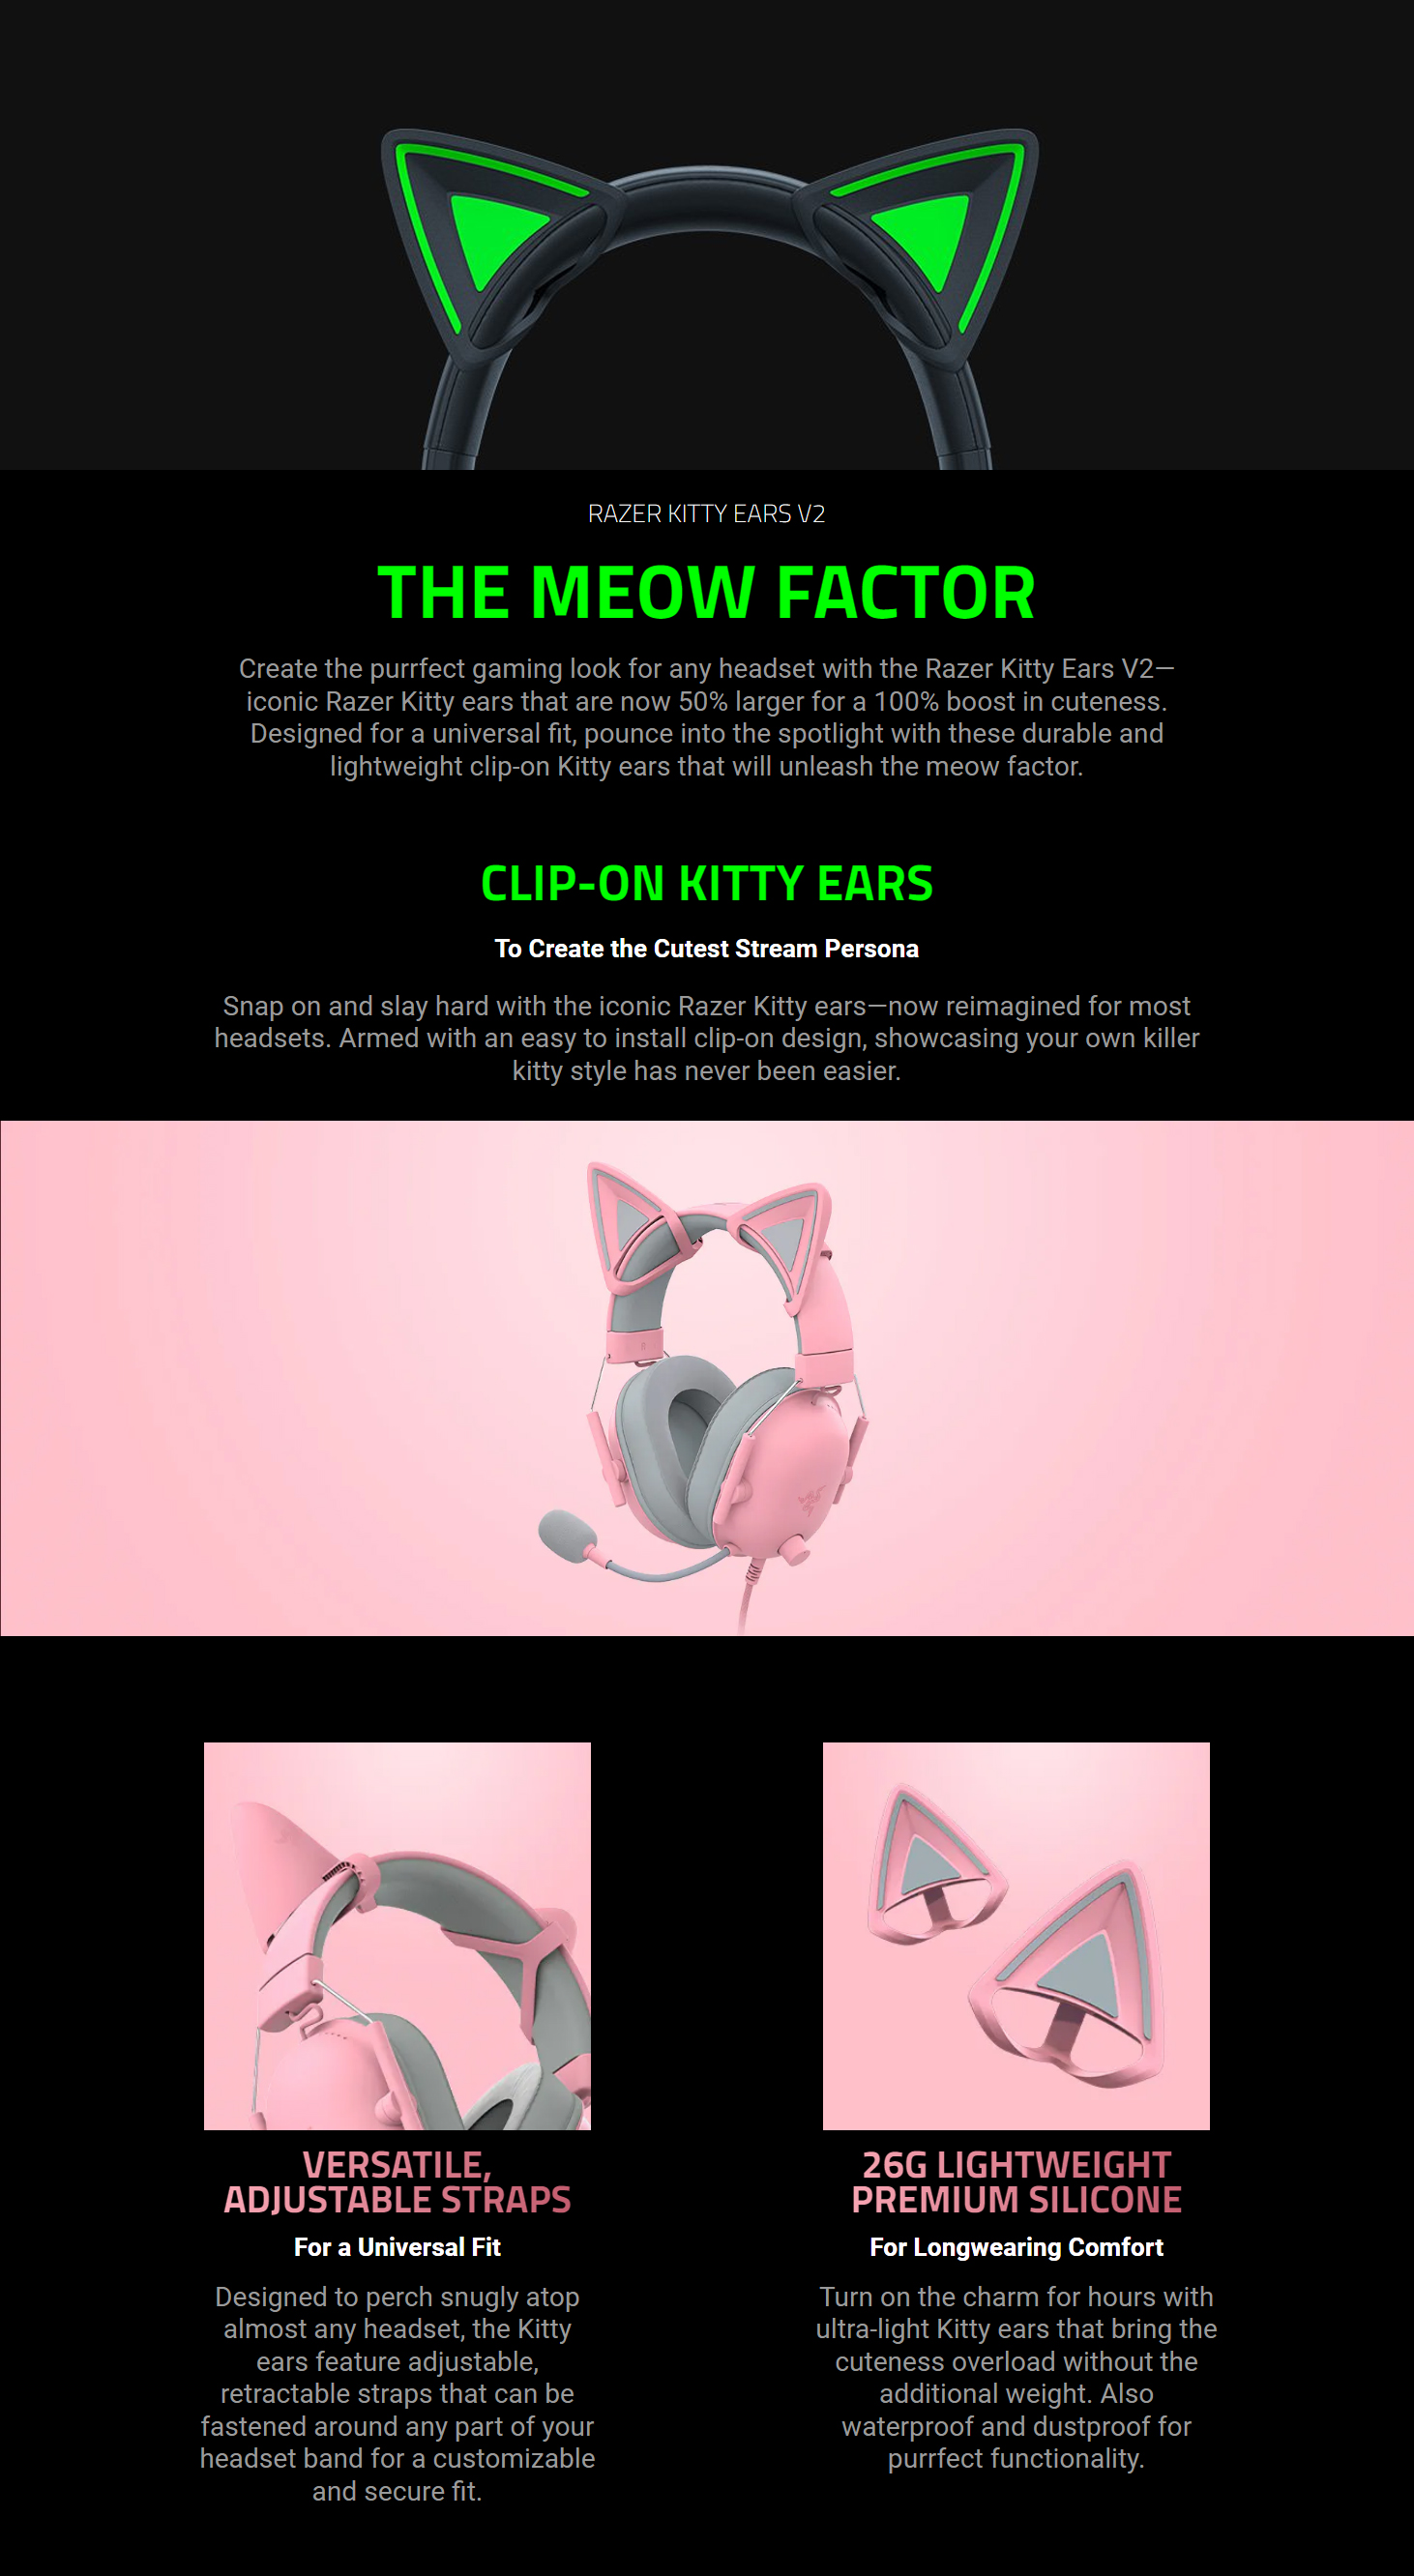 Headphones-Razer-Kitty-Ears-V2-Universal-Fit-Clip-on-Kitty-Ears-for-Headsets-RC21-02230100-R3M1-2